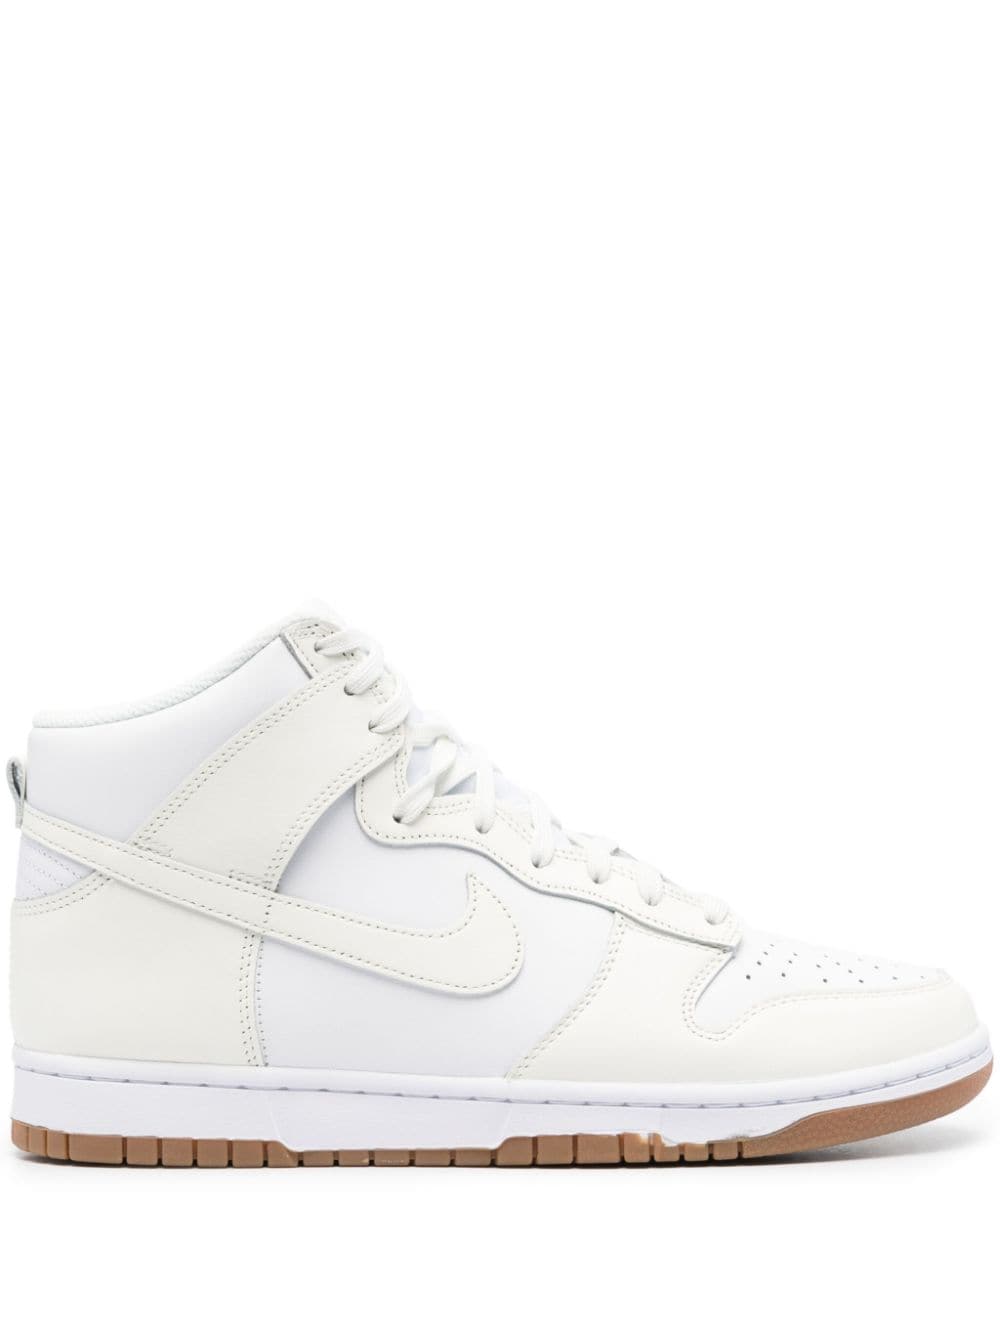 Nike Dunk High Leather Sneakers In Weiss